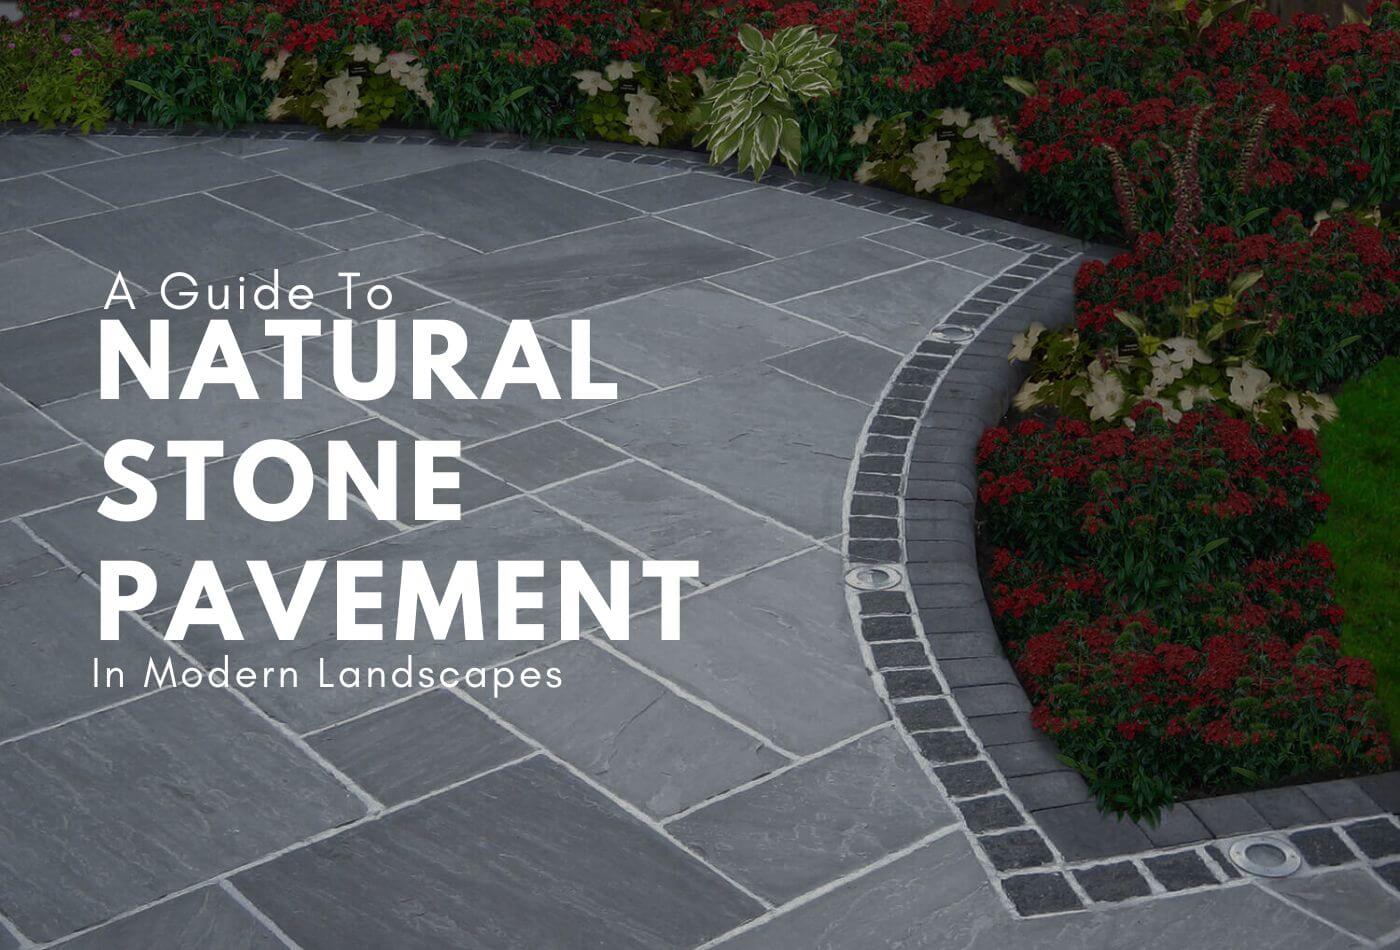 A Guide To Natural Stone Pavement In Modern Landscapes